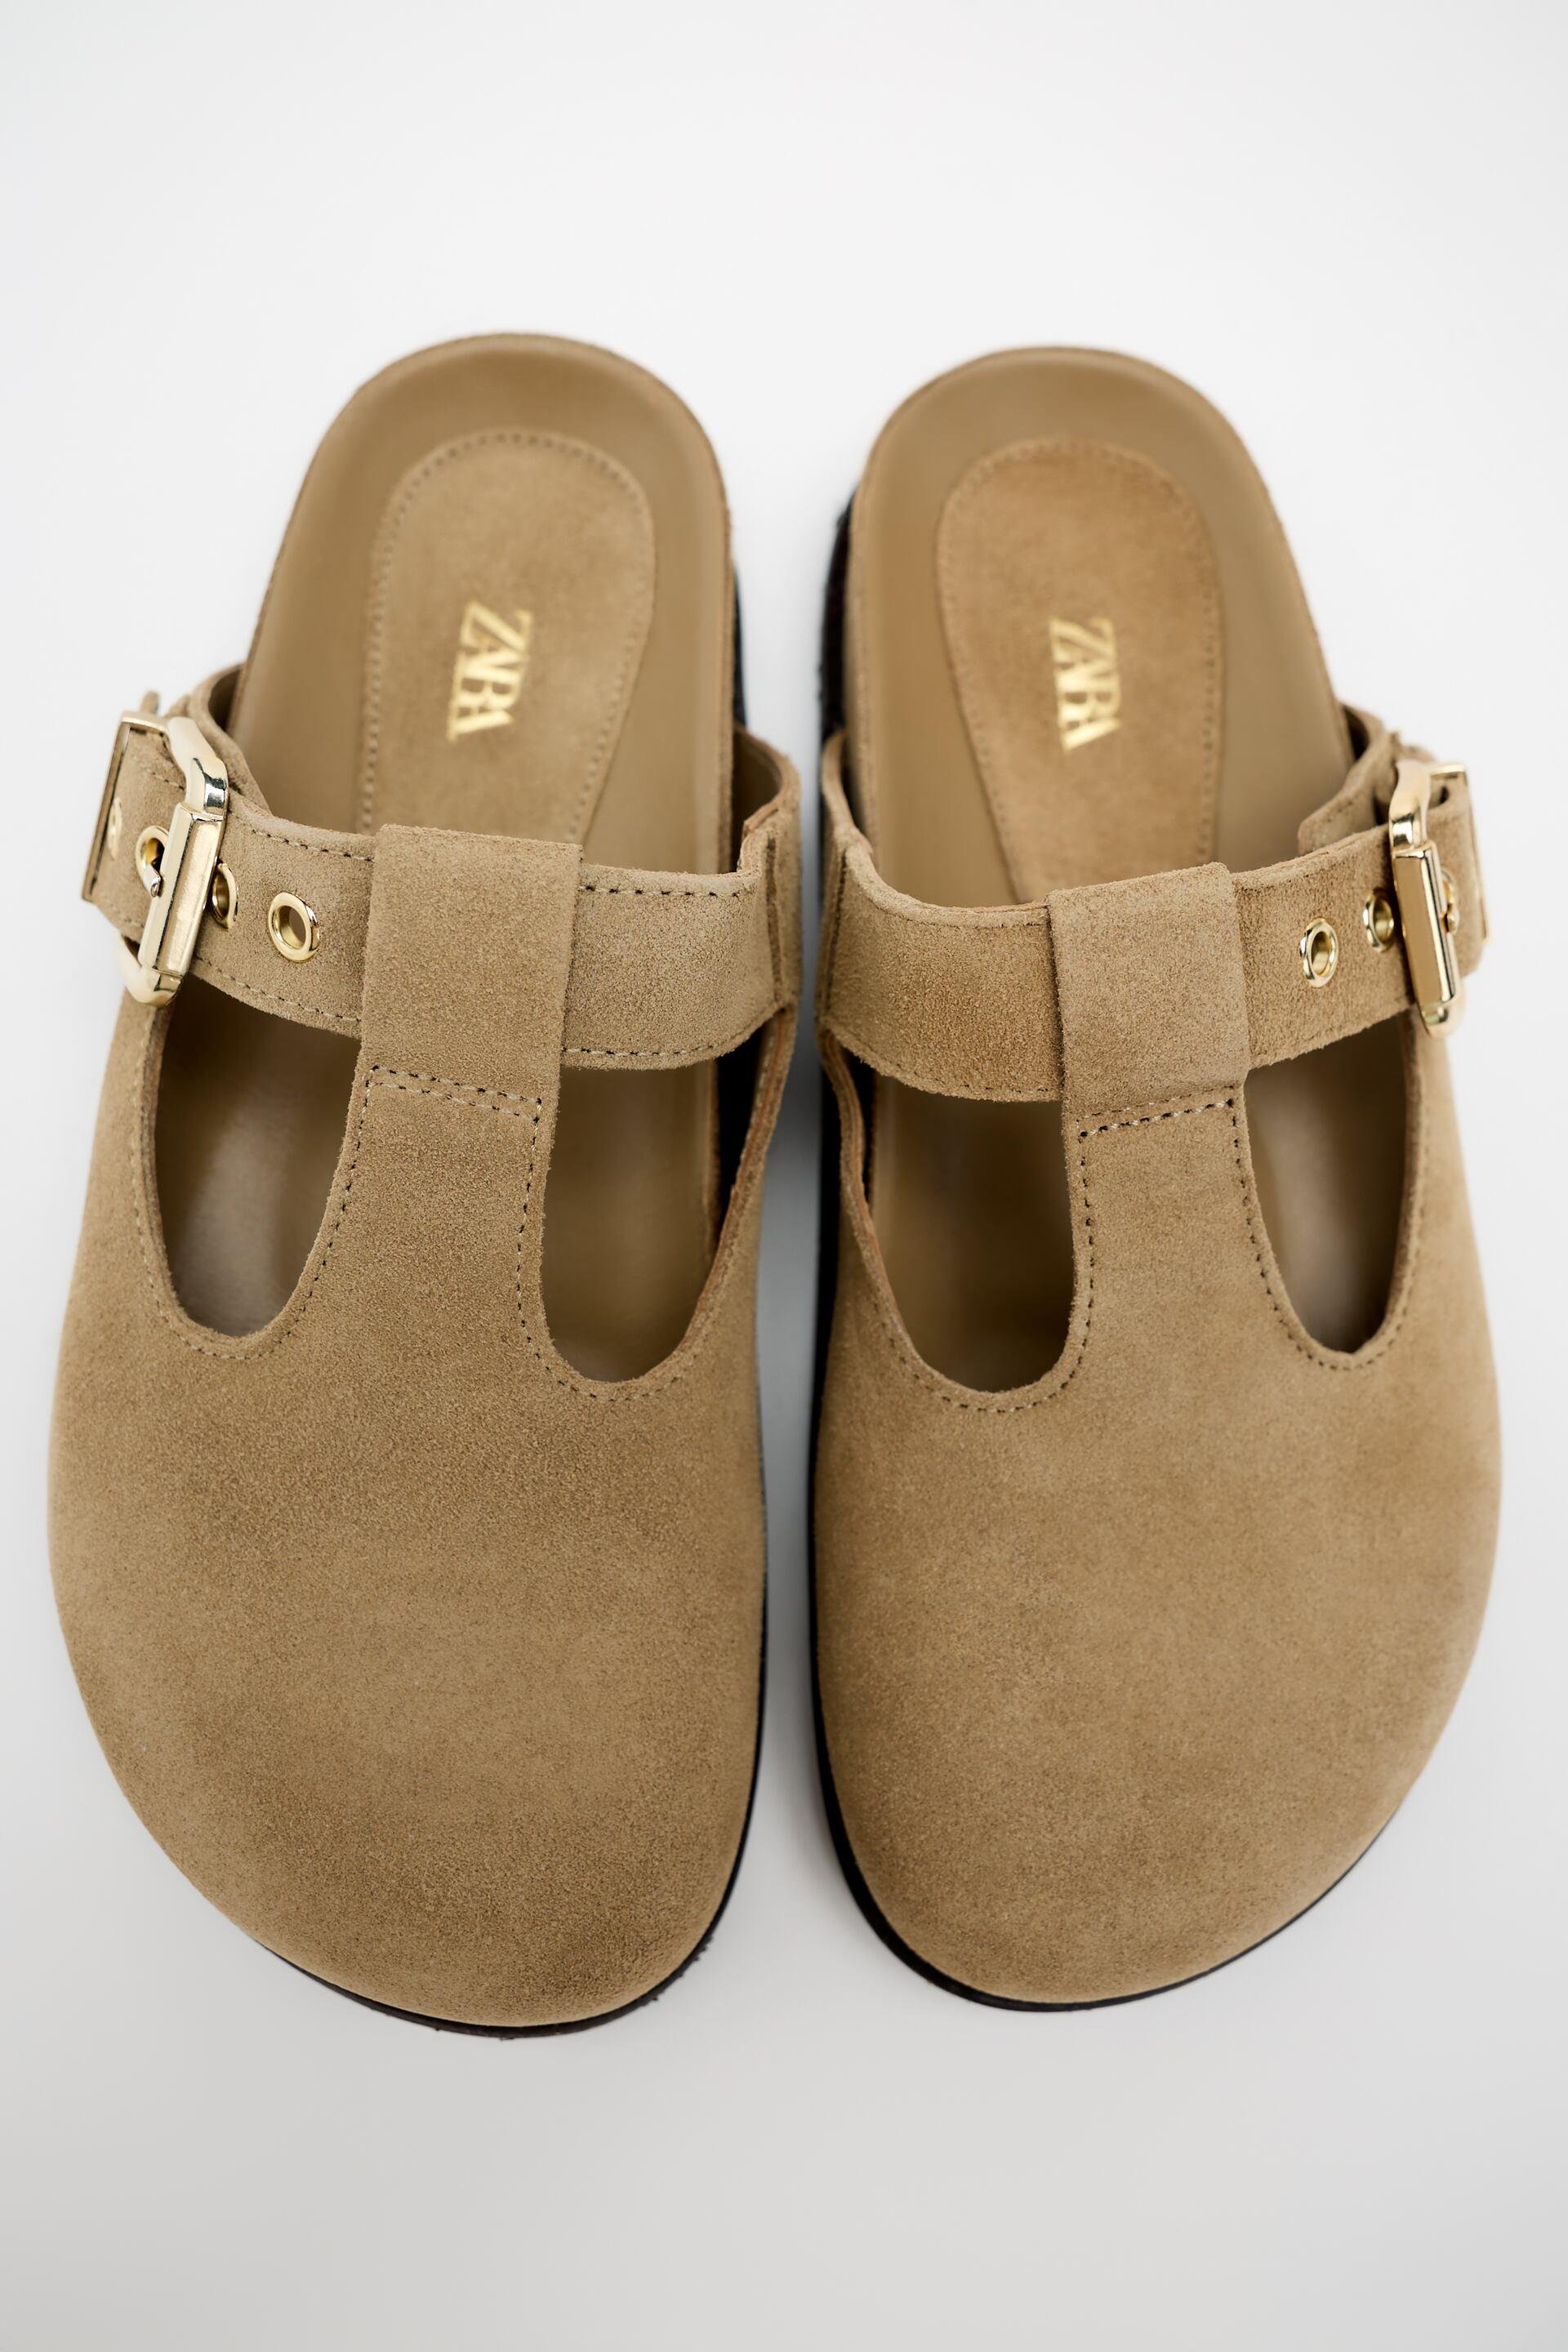 BUCKLED SUEDE CLOGS by ZARA